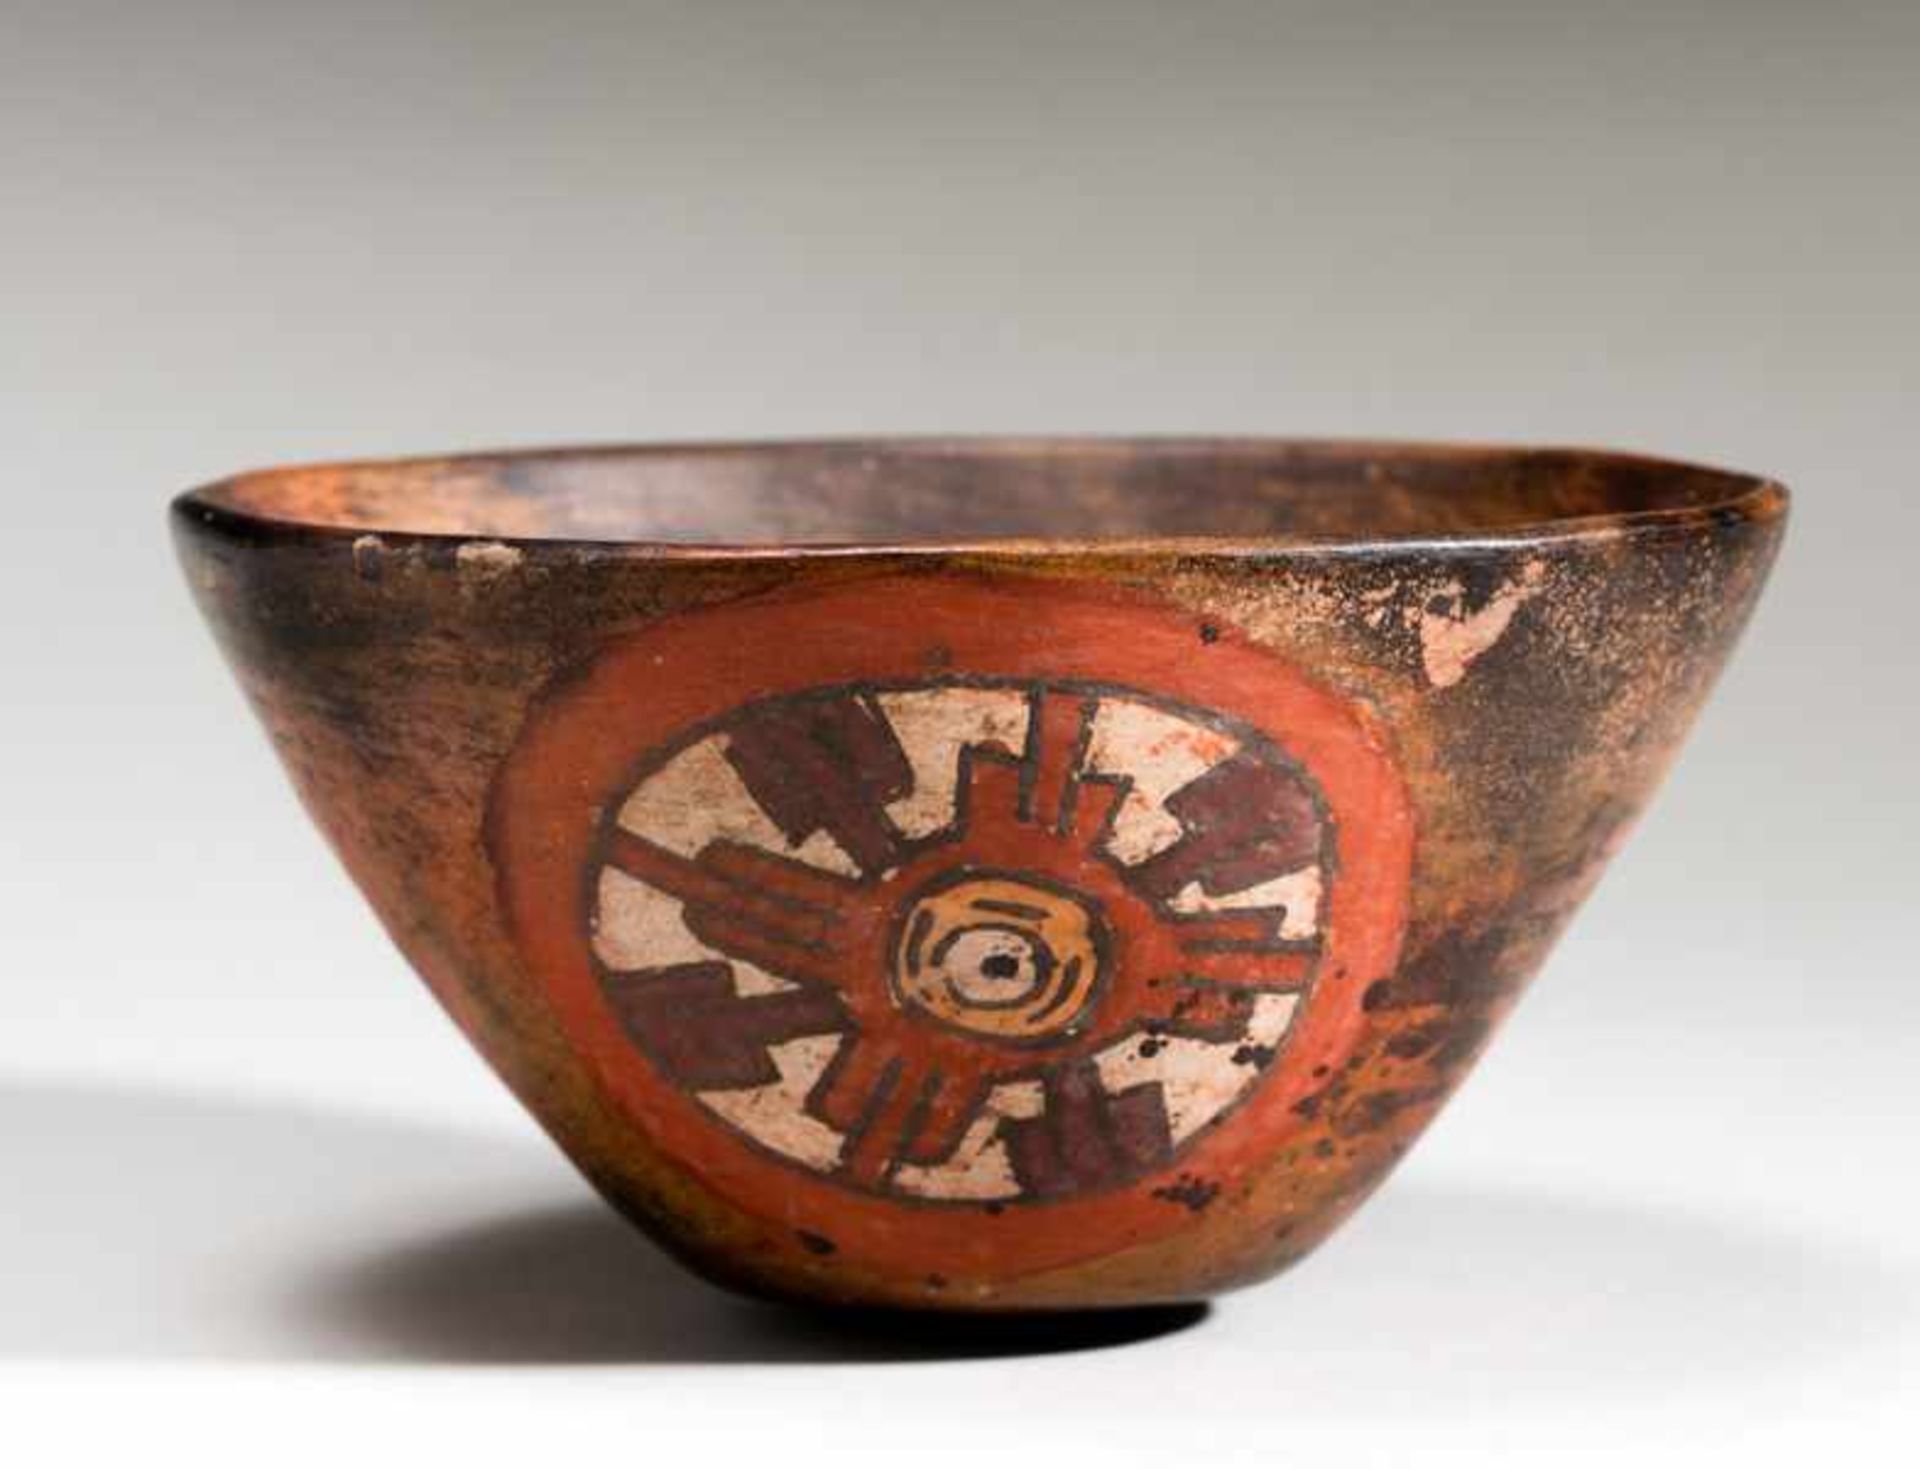 DEEP DRINKING DISH Painted terracotta. Nazca, Peru, ca. 400 - 600Small, slightly arched bottom